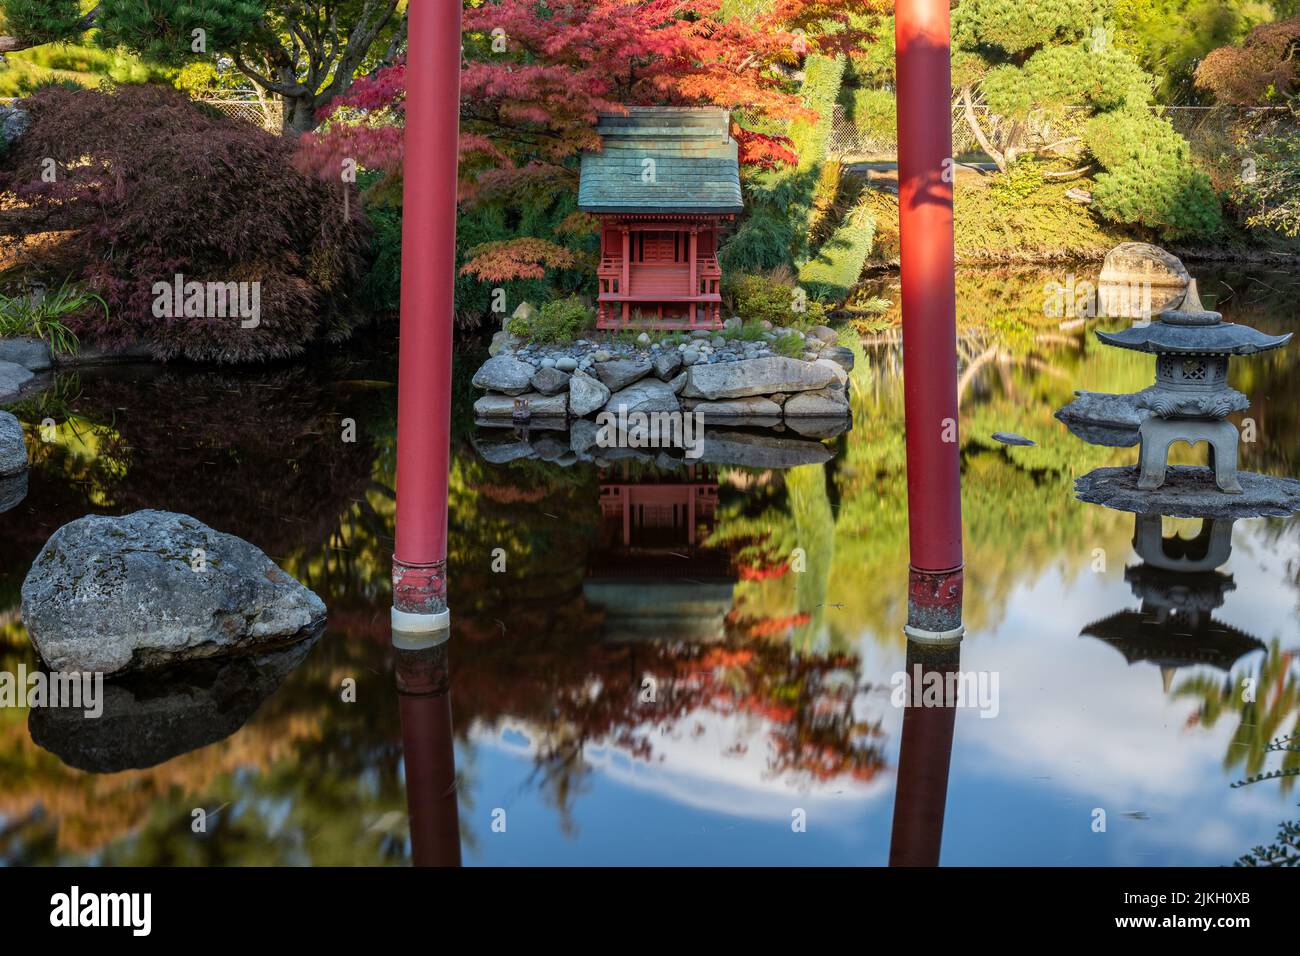 Reflection in Japanese Garden Pond of Red Pagoda and Torii Gate in Point Defiance Park, Tacoma, WA Stock Photo